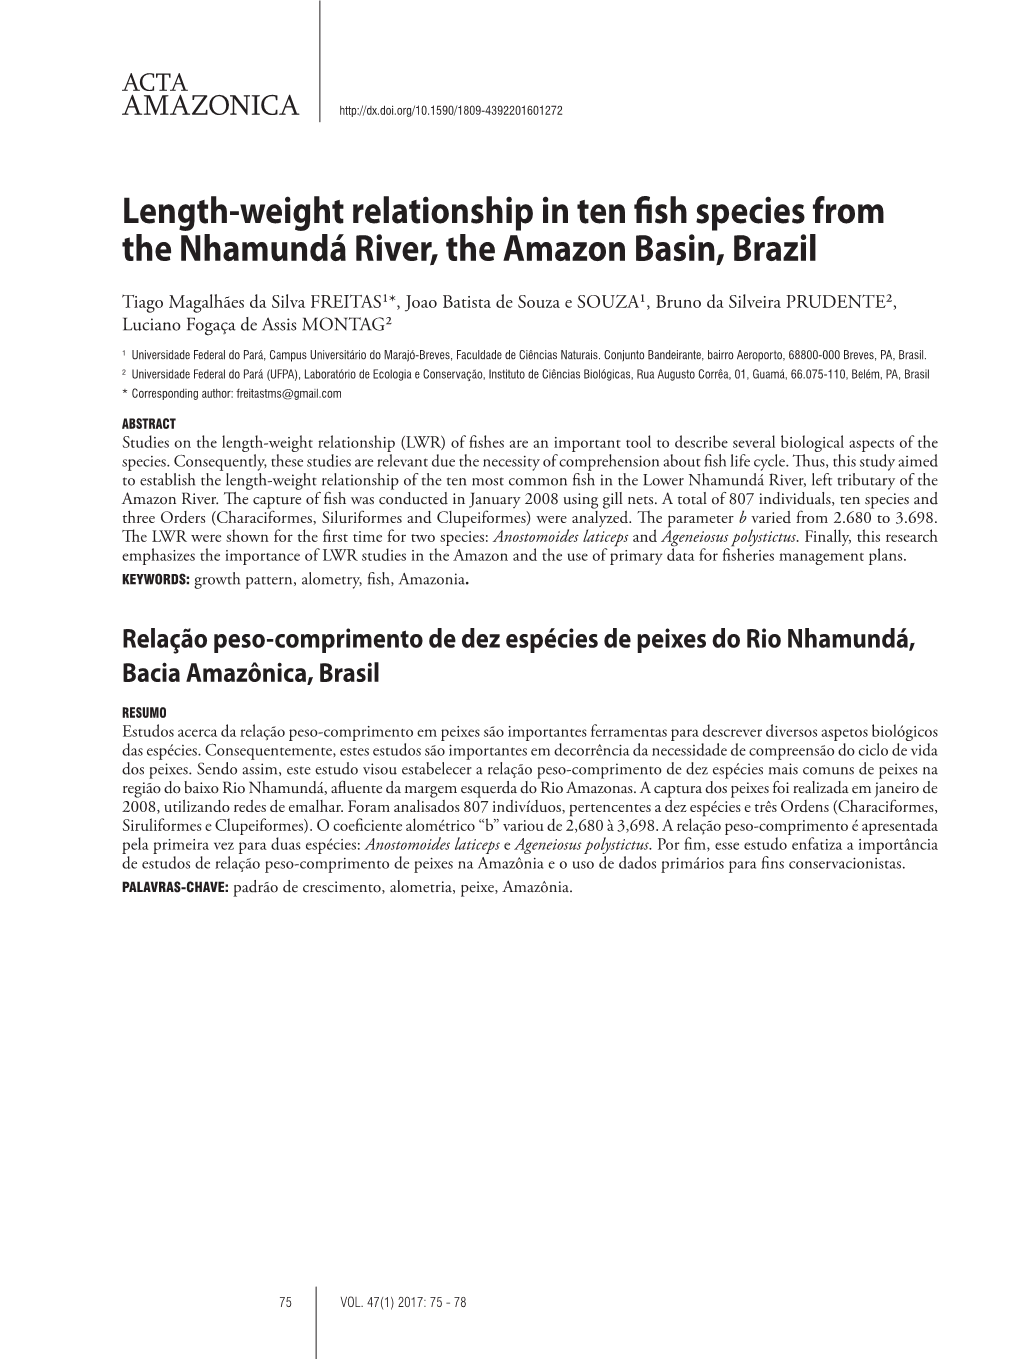 Length-Weight Relationship in Ten Fish Species from the Nhamundá River, the Amazon Basin, Brazil